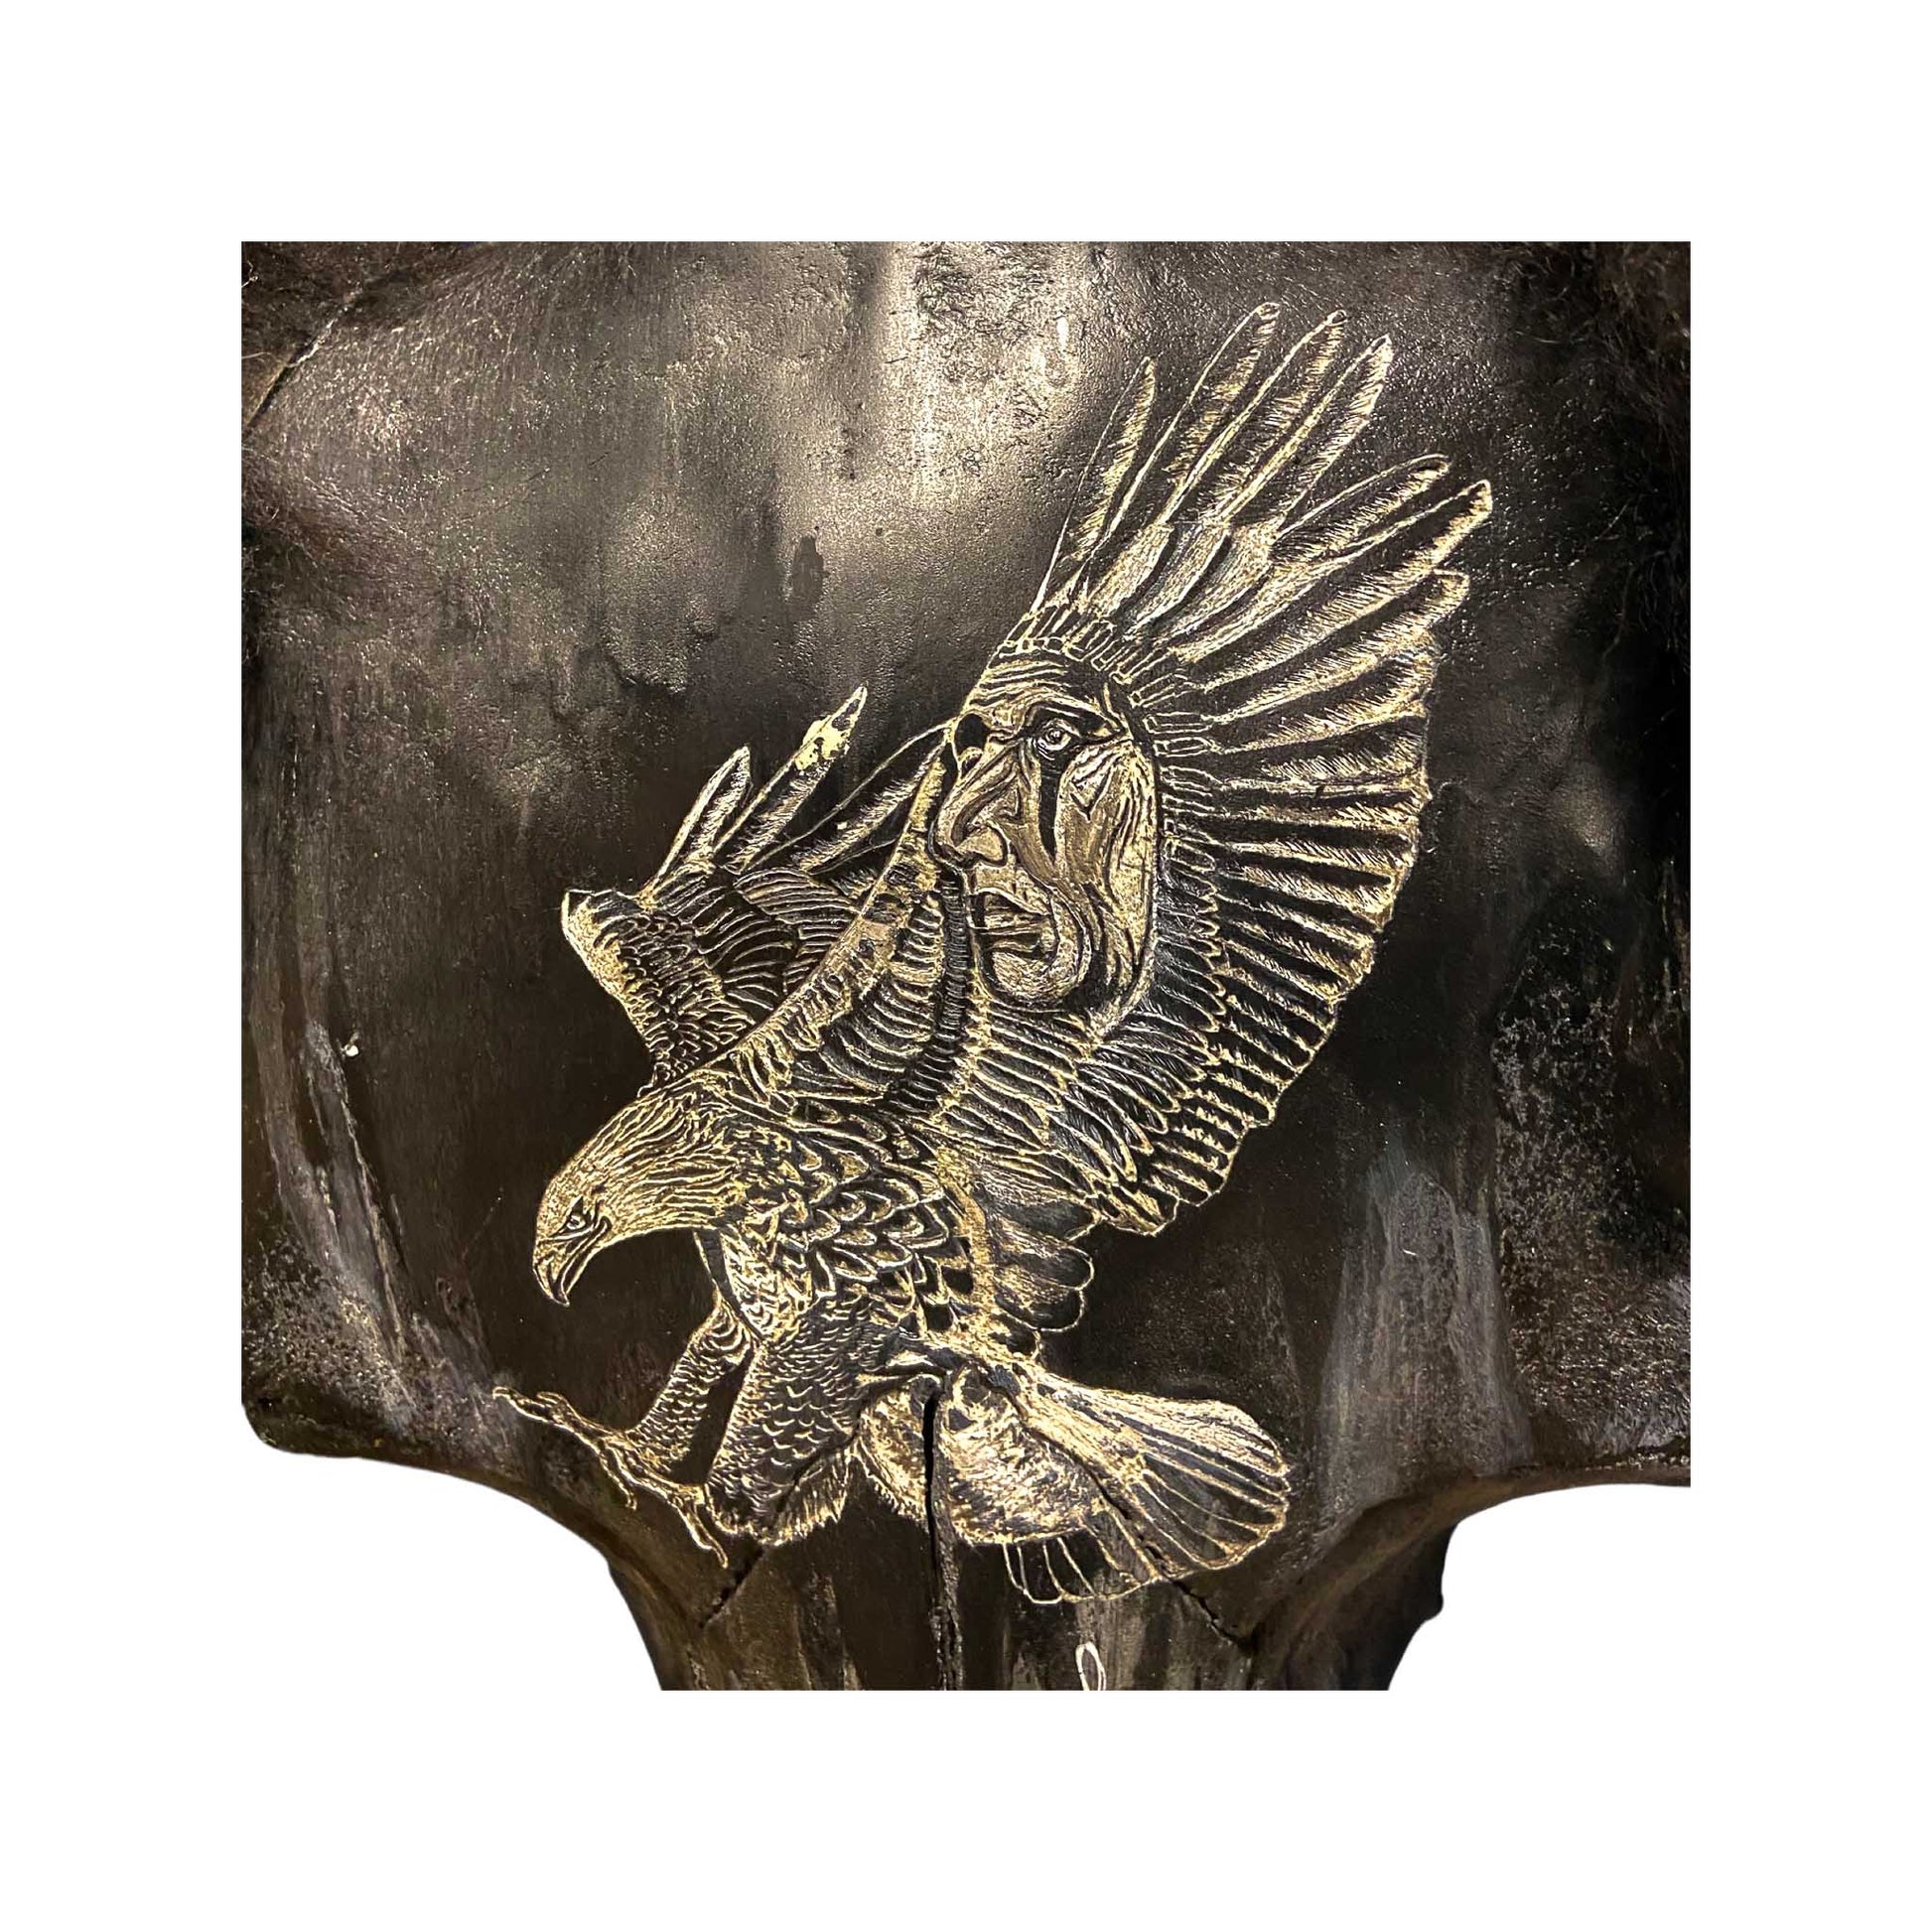 A Bison Engraved Skull Taxidermy Wall Decor featuring an eagle with a Native American chief